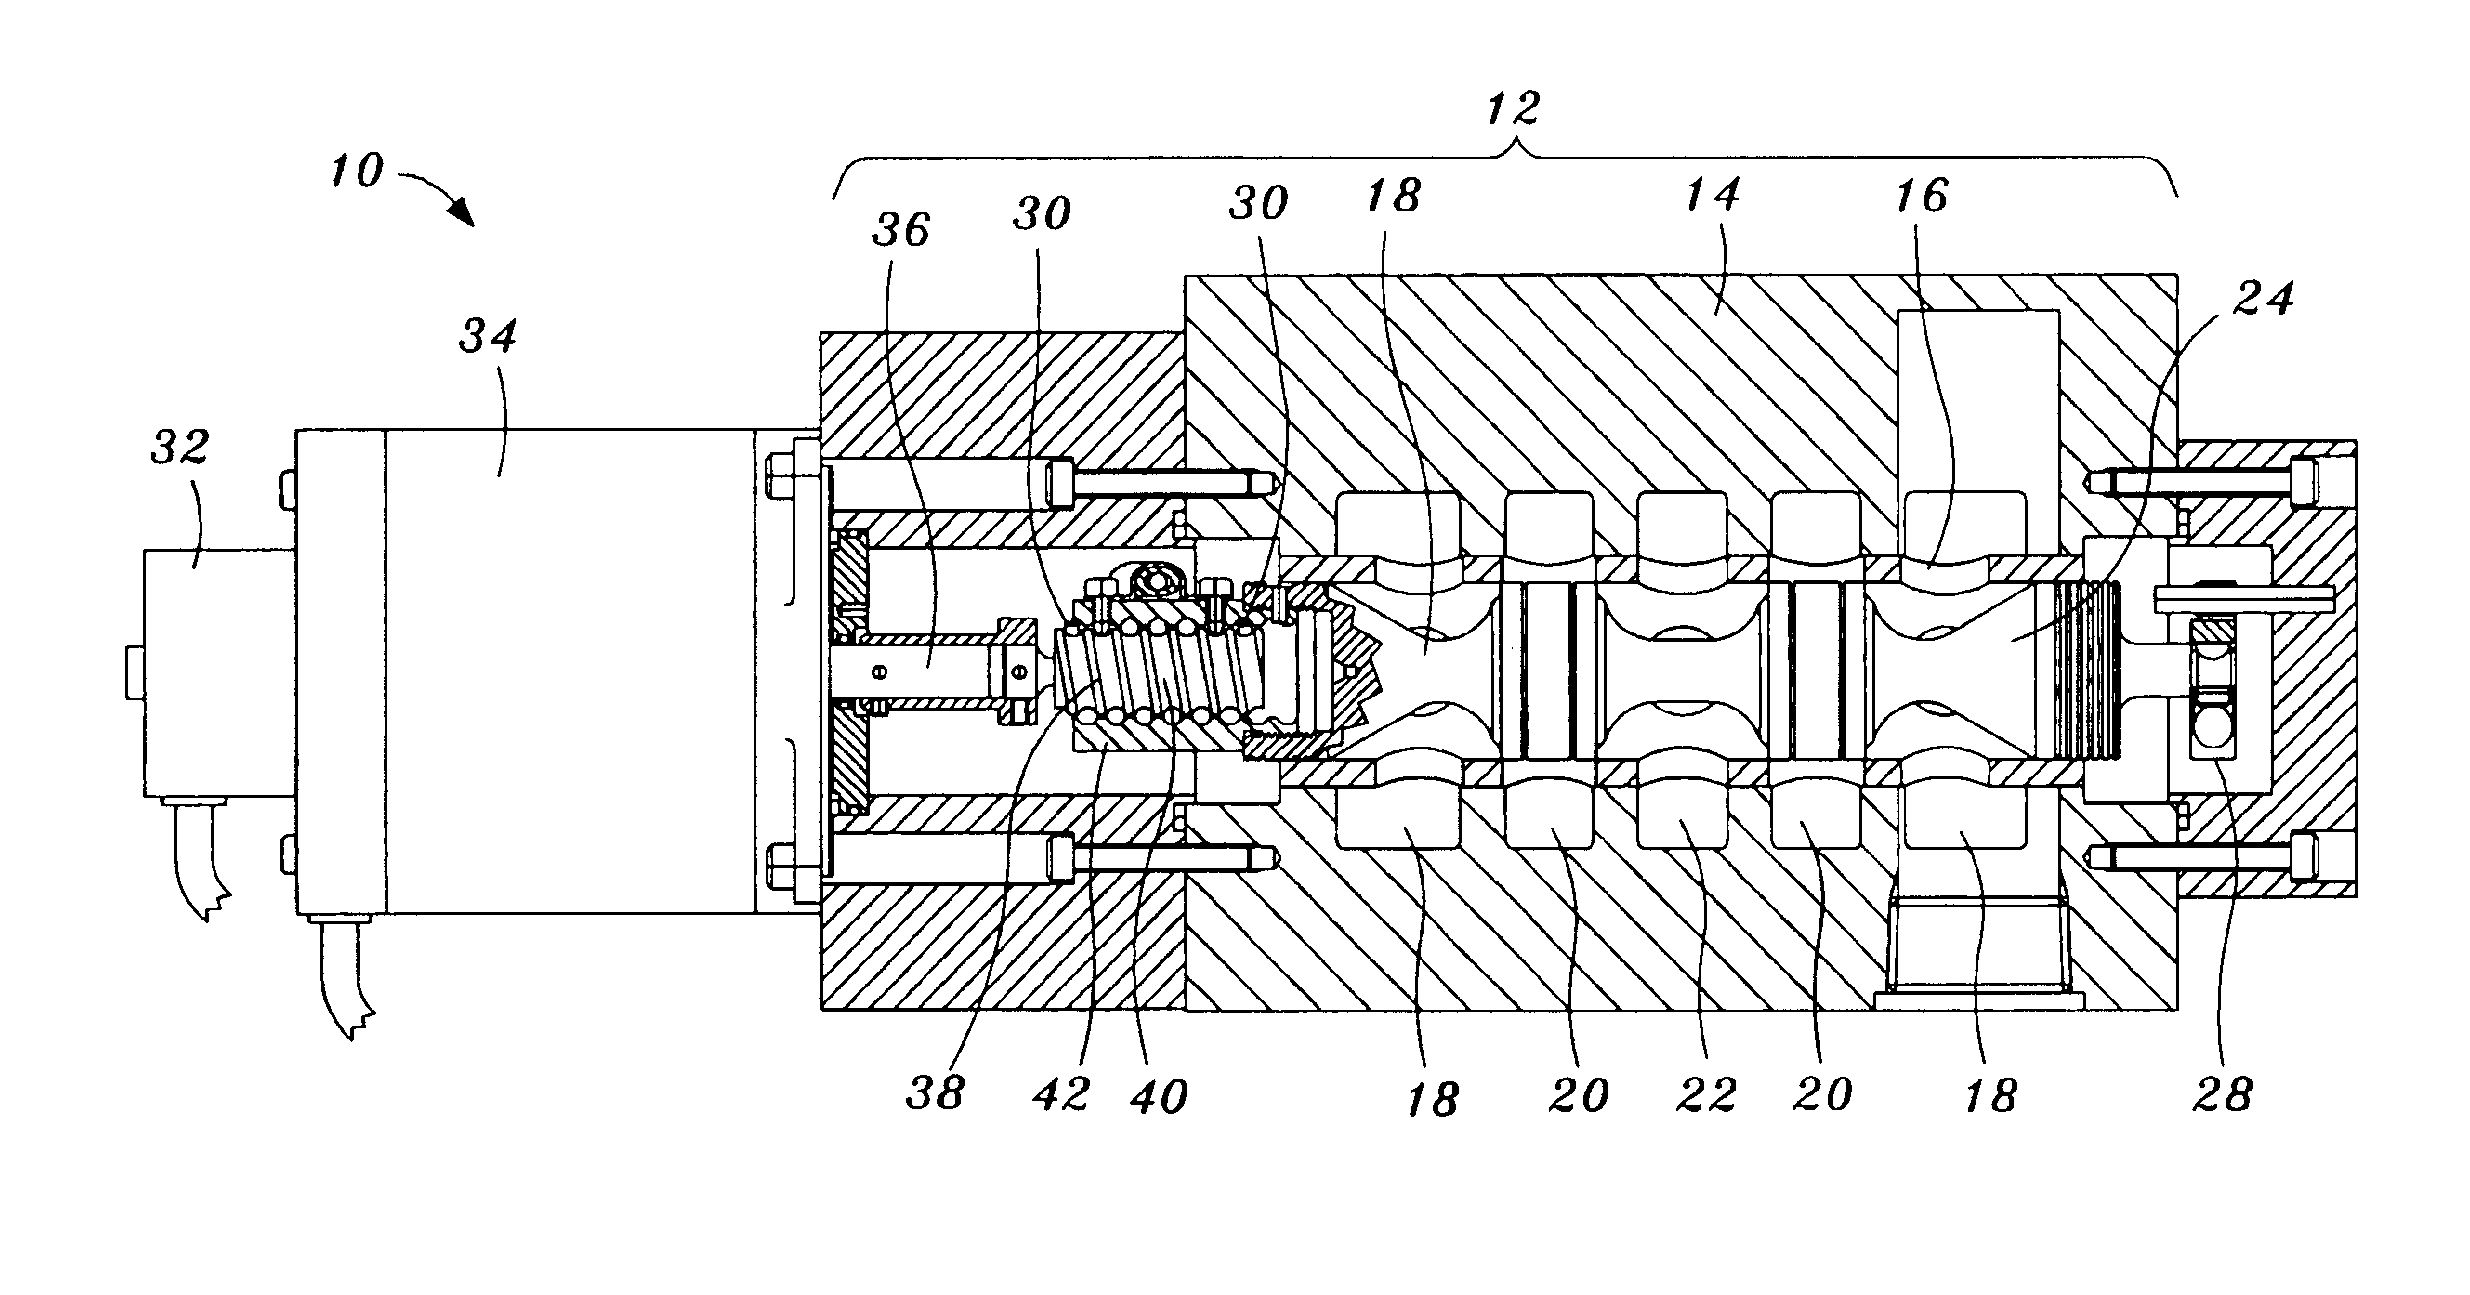 Predictive maintenance and initialization system for a digital servovalve